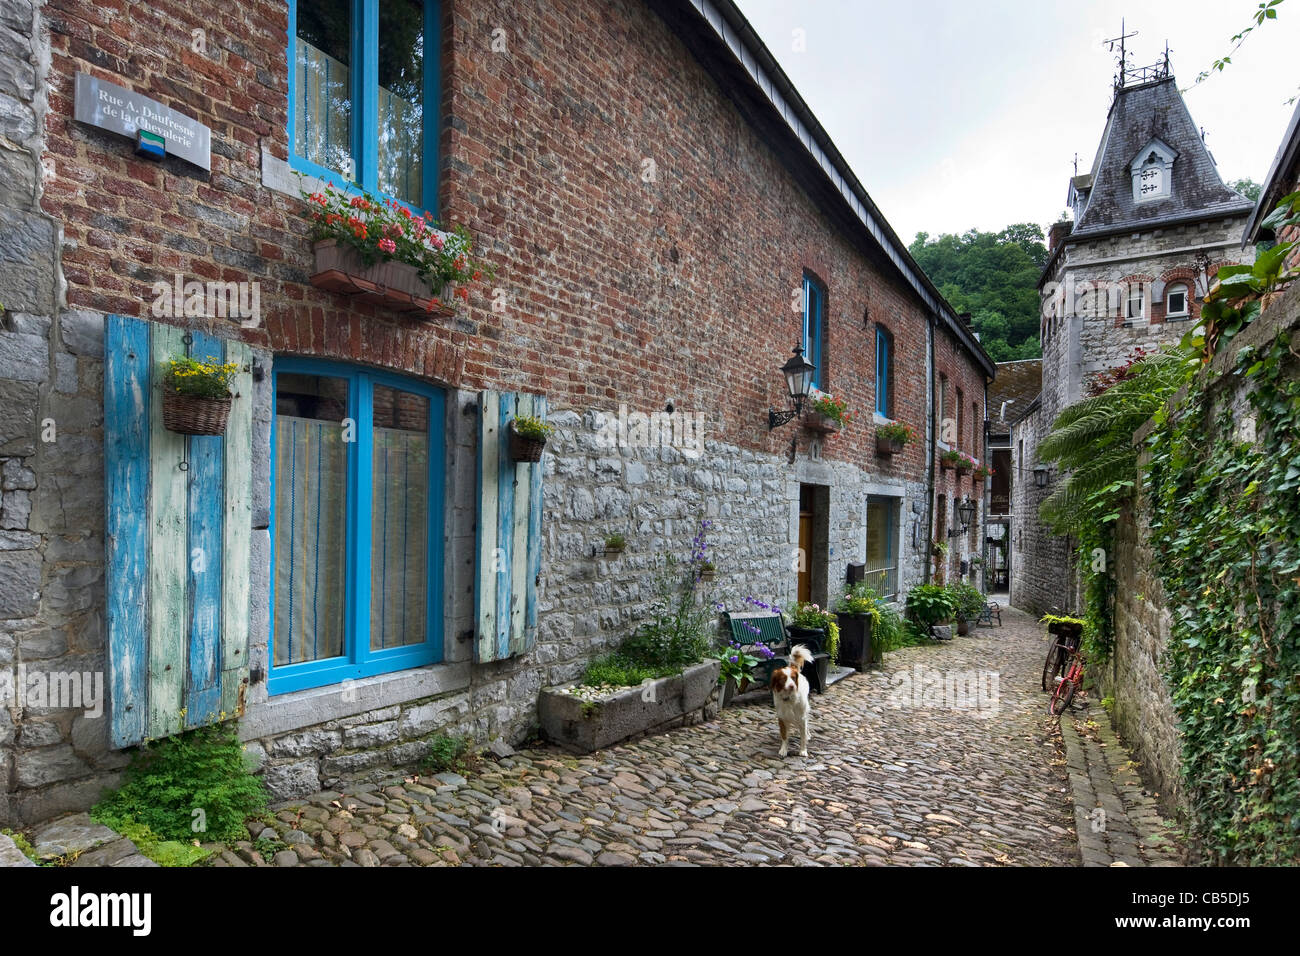 Cobbled alley at Durbuy, Ardennes, Belgium Stock Photo